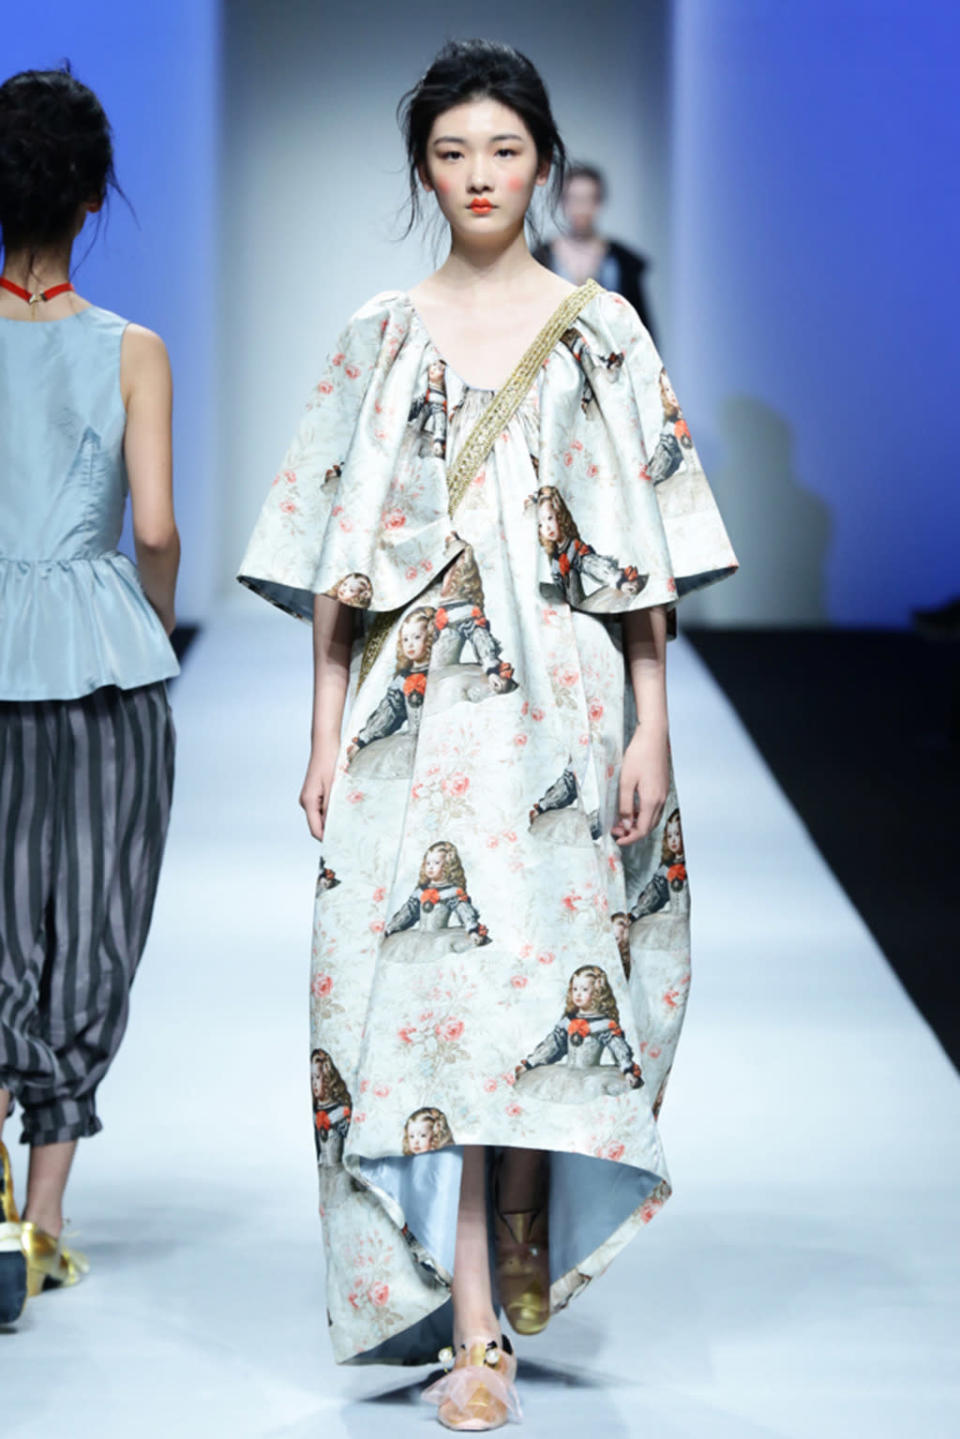 The beauty at Black Spoon RTW Spring 2016 went for the full-on geisha face at Shanghai Fashion Week.